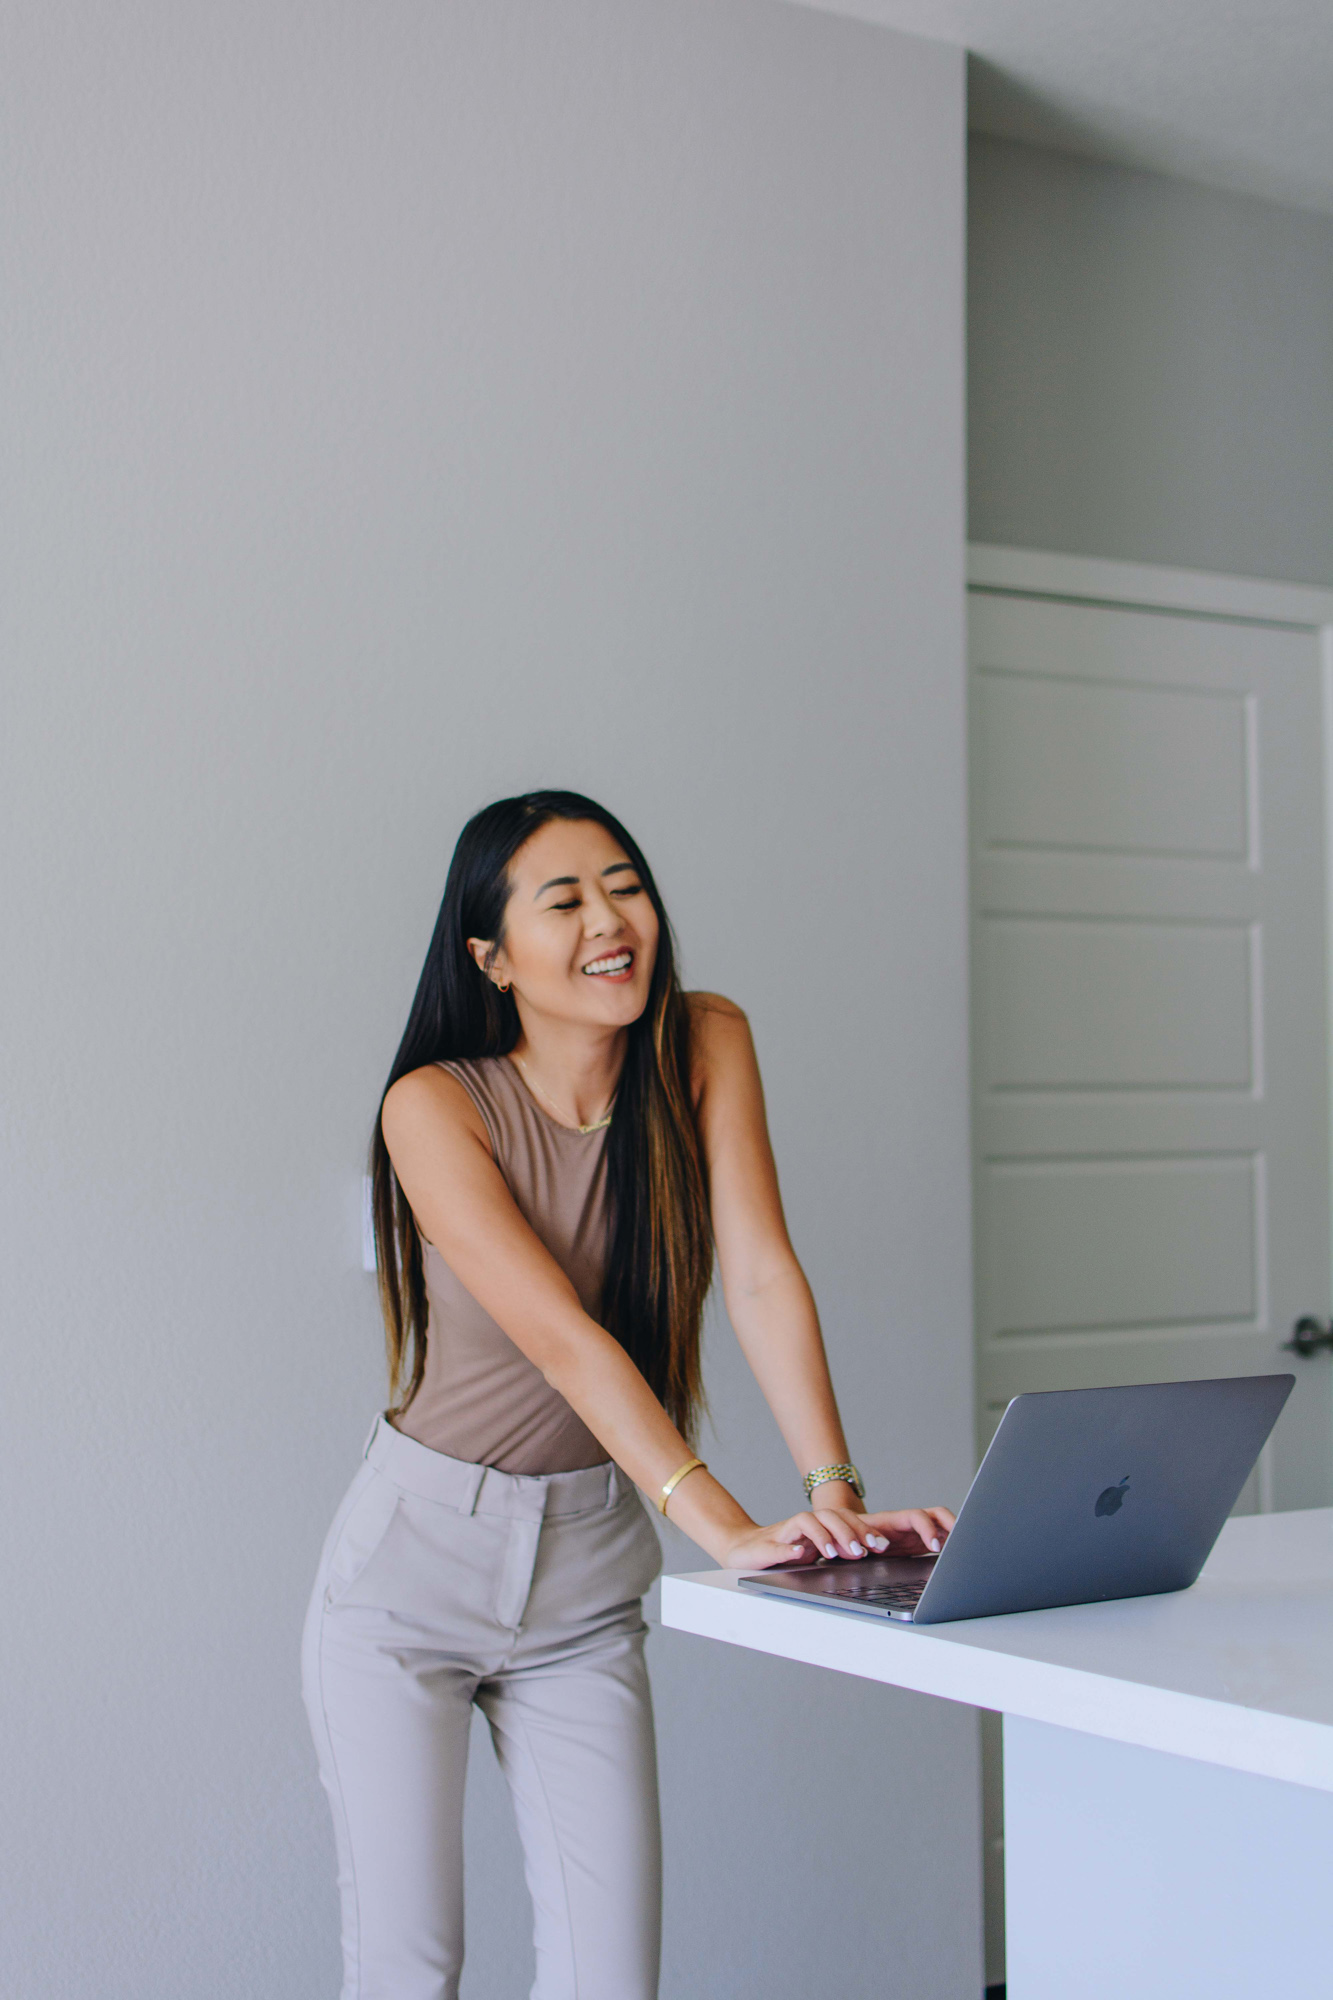 Arizona blogger Demi Bang talks about how she's transitioning from working at a smaller company to a larger company.